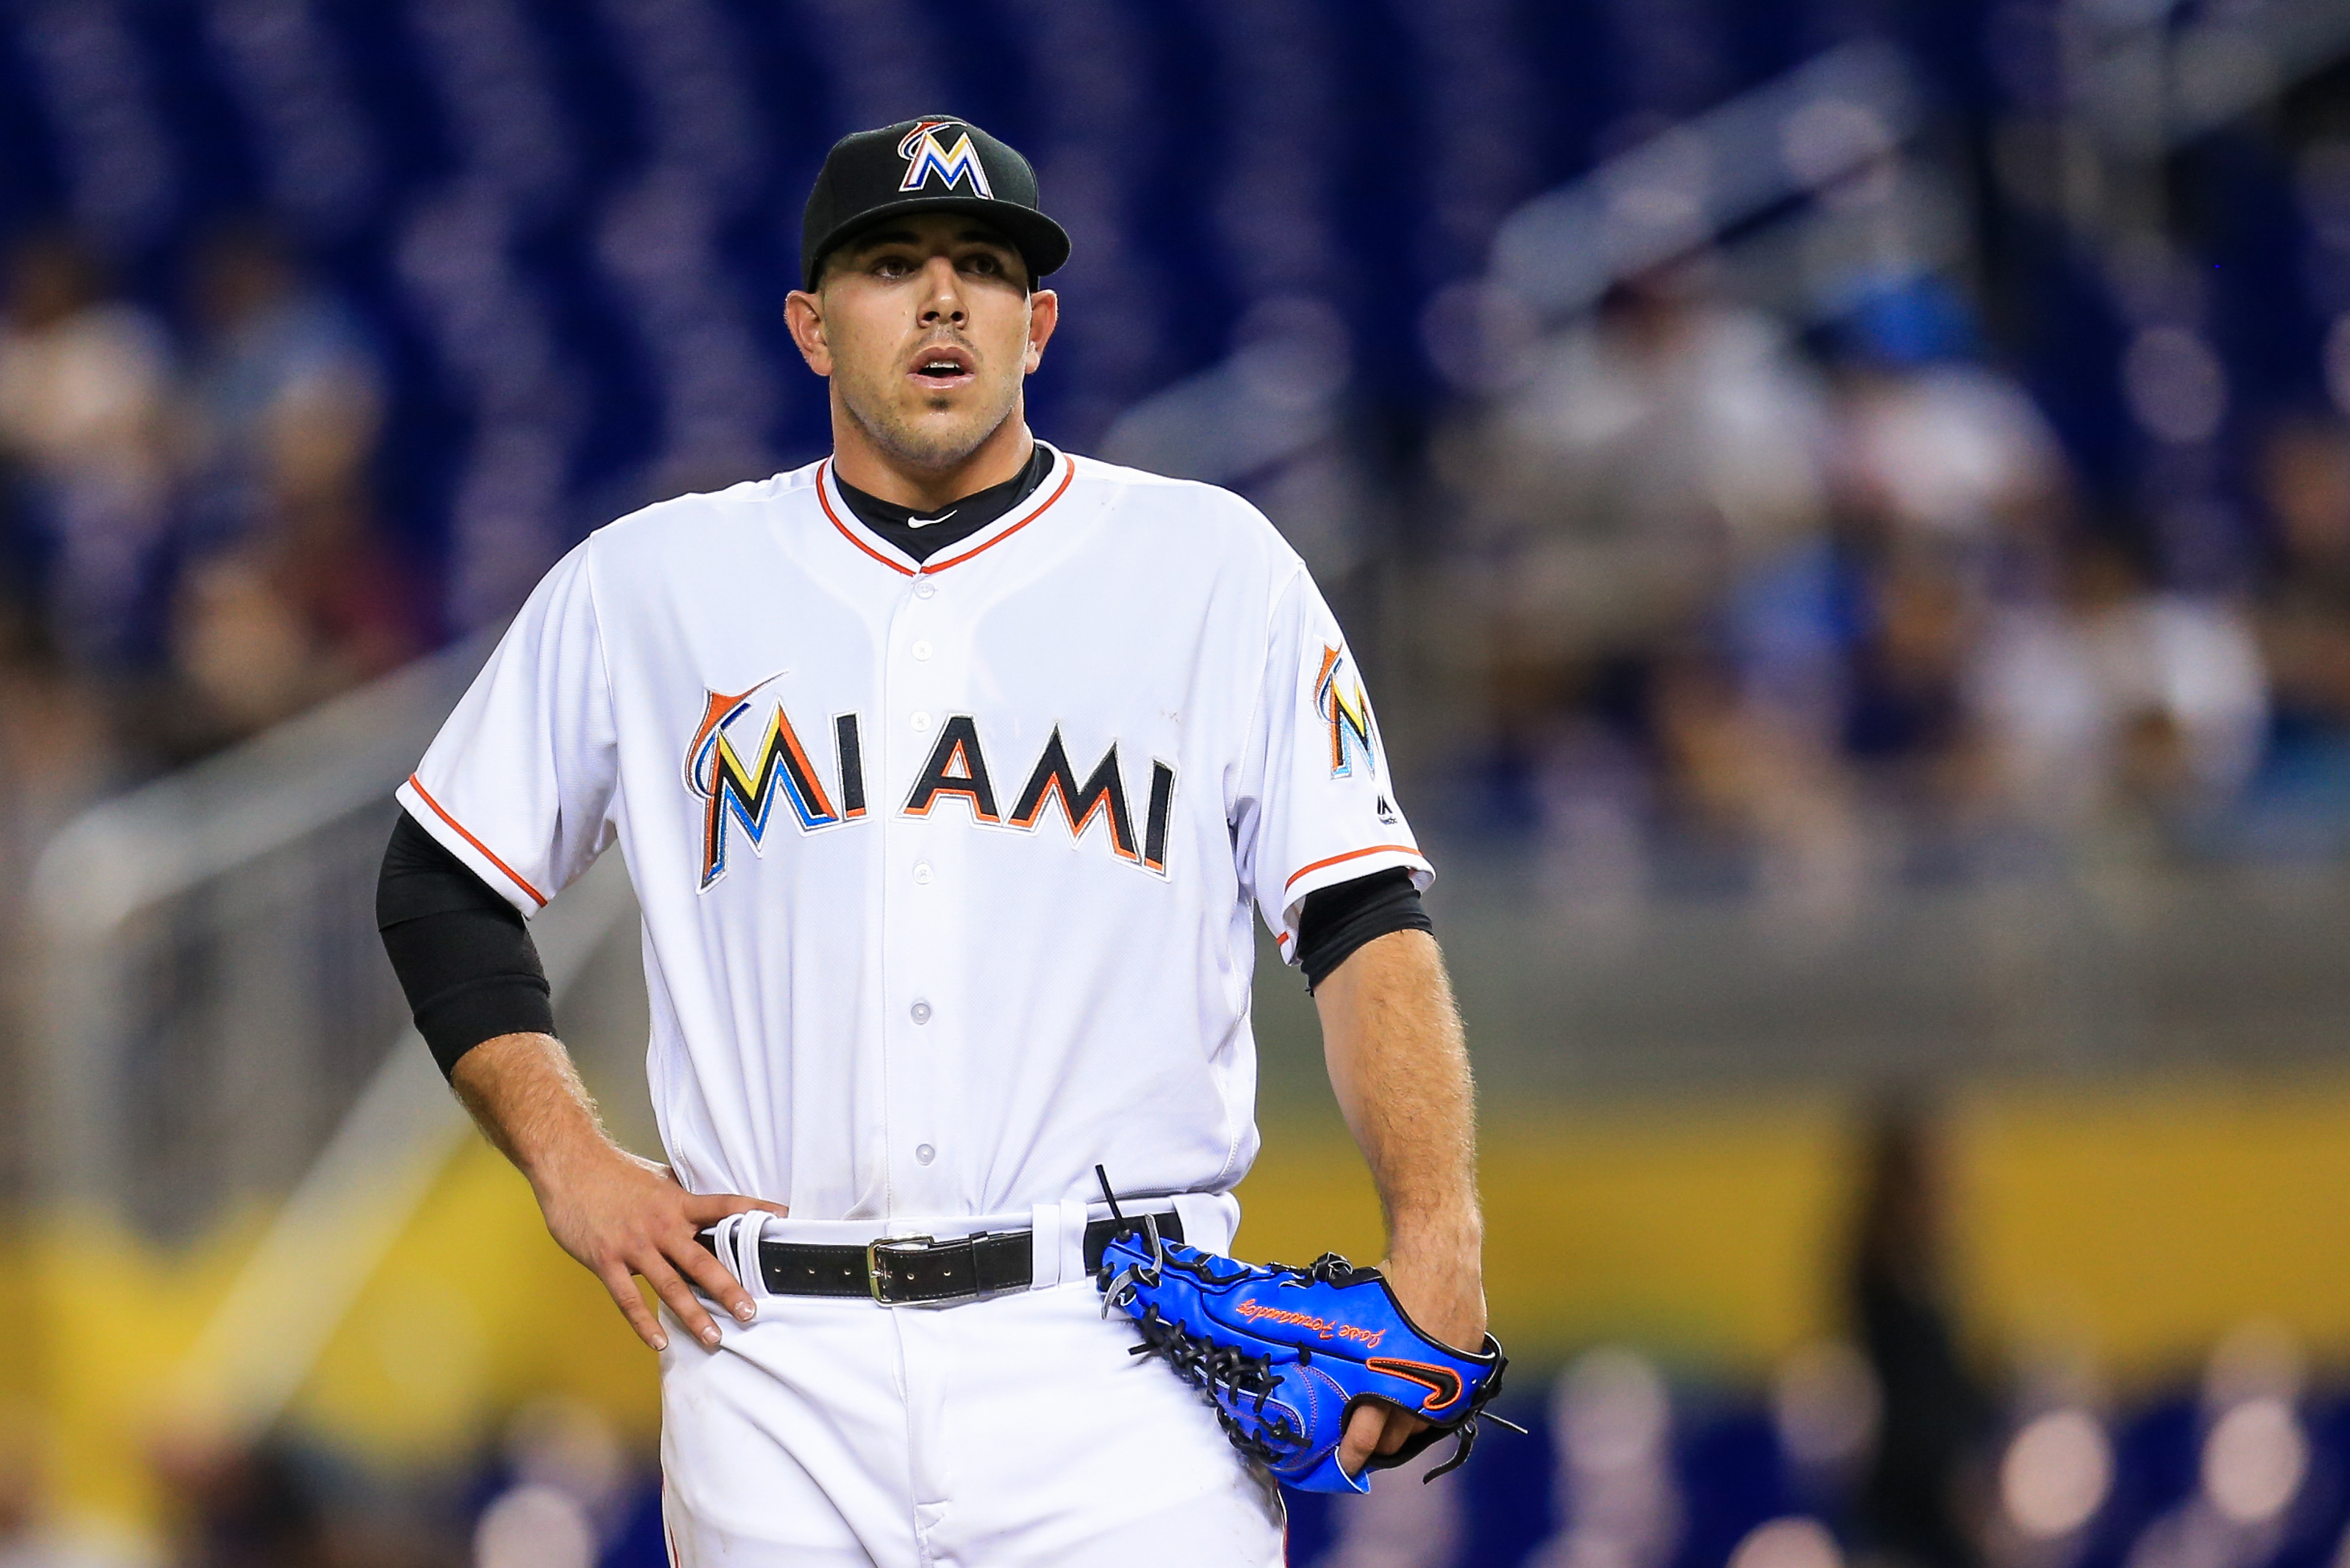 Miami Marlins SP Jose Fernandez Dies at Age 24 in Boating Accident